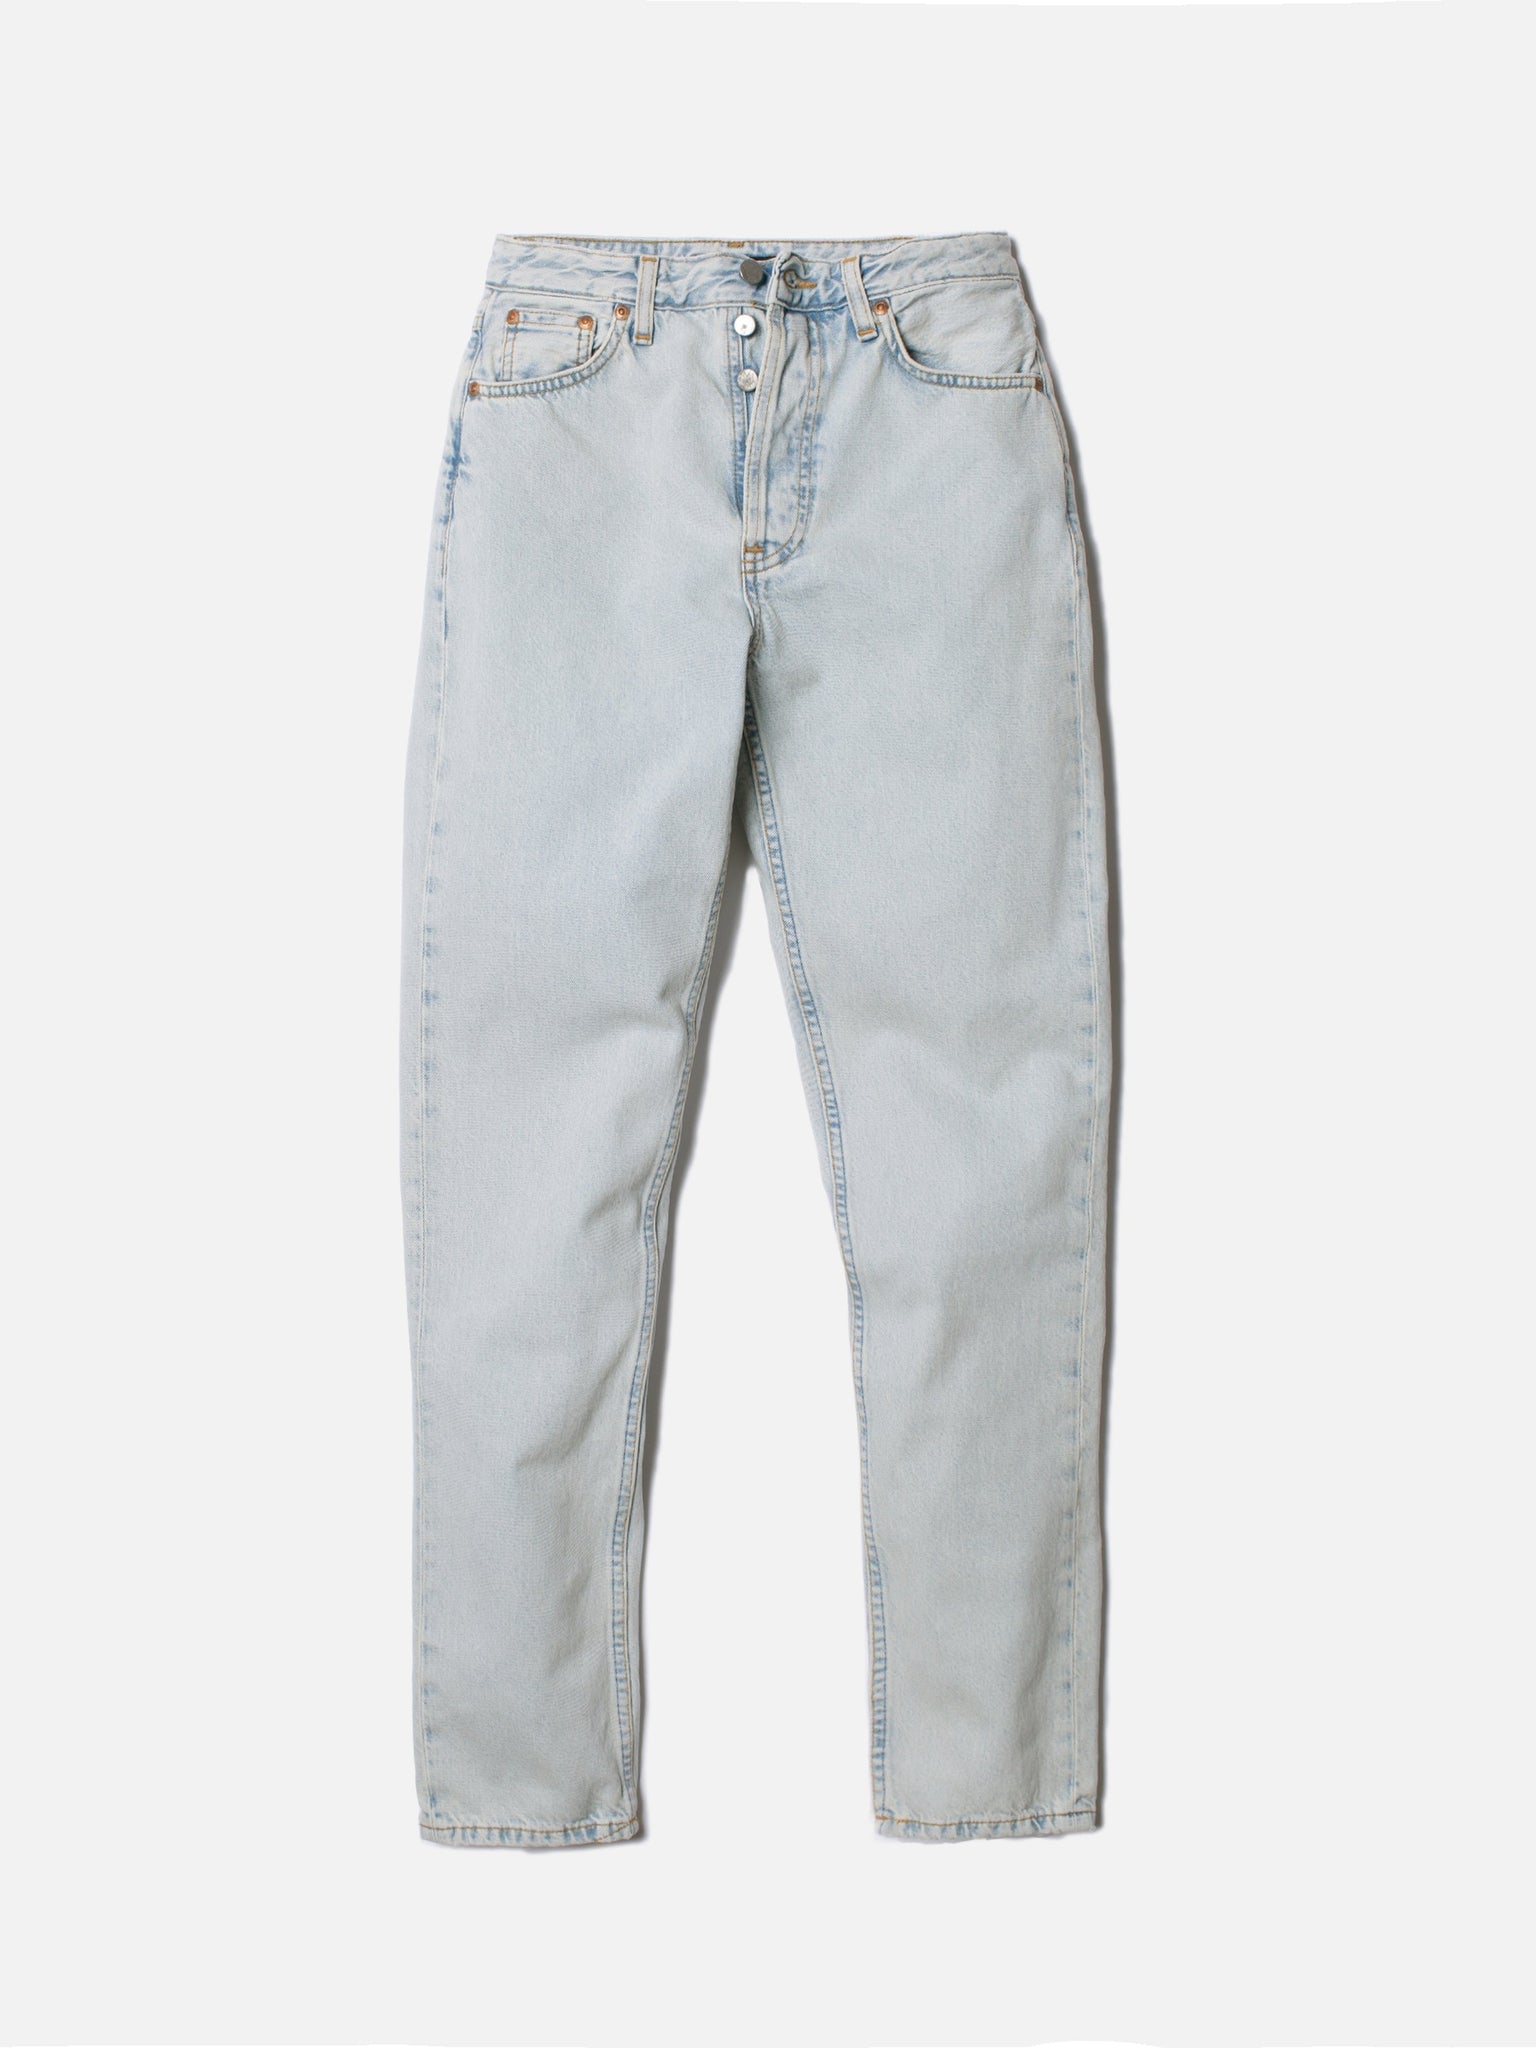 Breezy Britt Touch Of Blue - INHABIT - Exclusive Stockist of Nudie Jeans